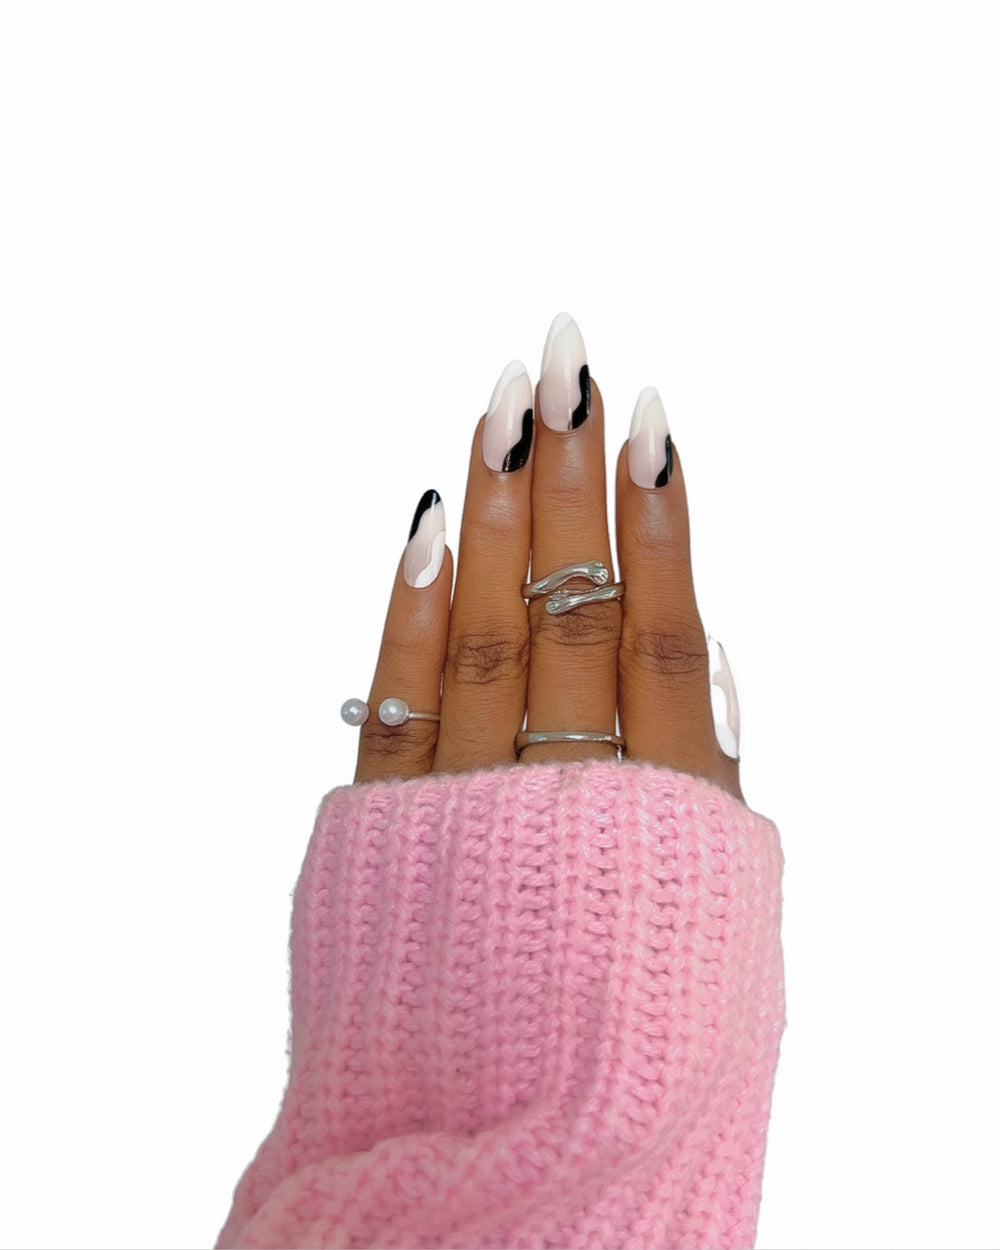 3 Tone Press on Nails in Lagos, Nigeria - All Things Chic